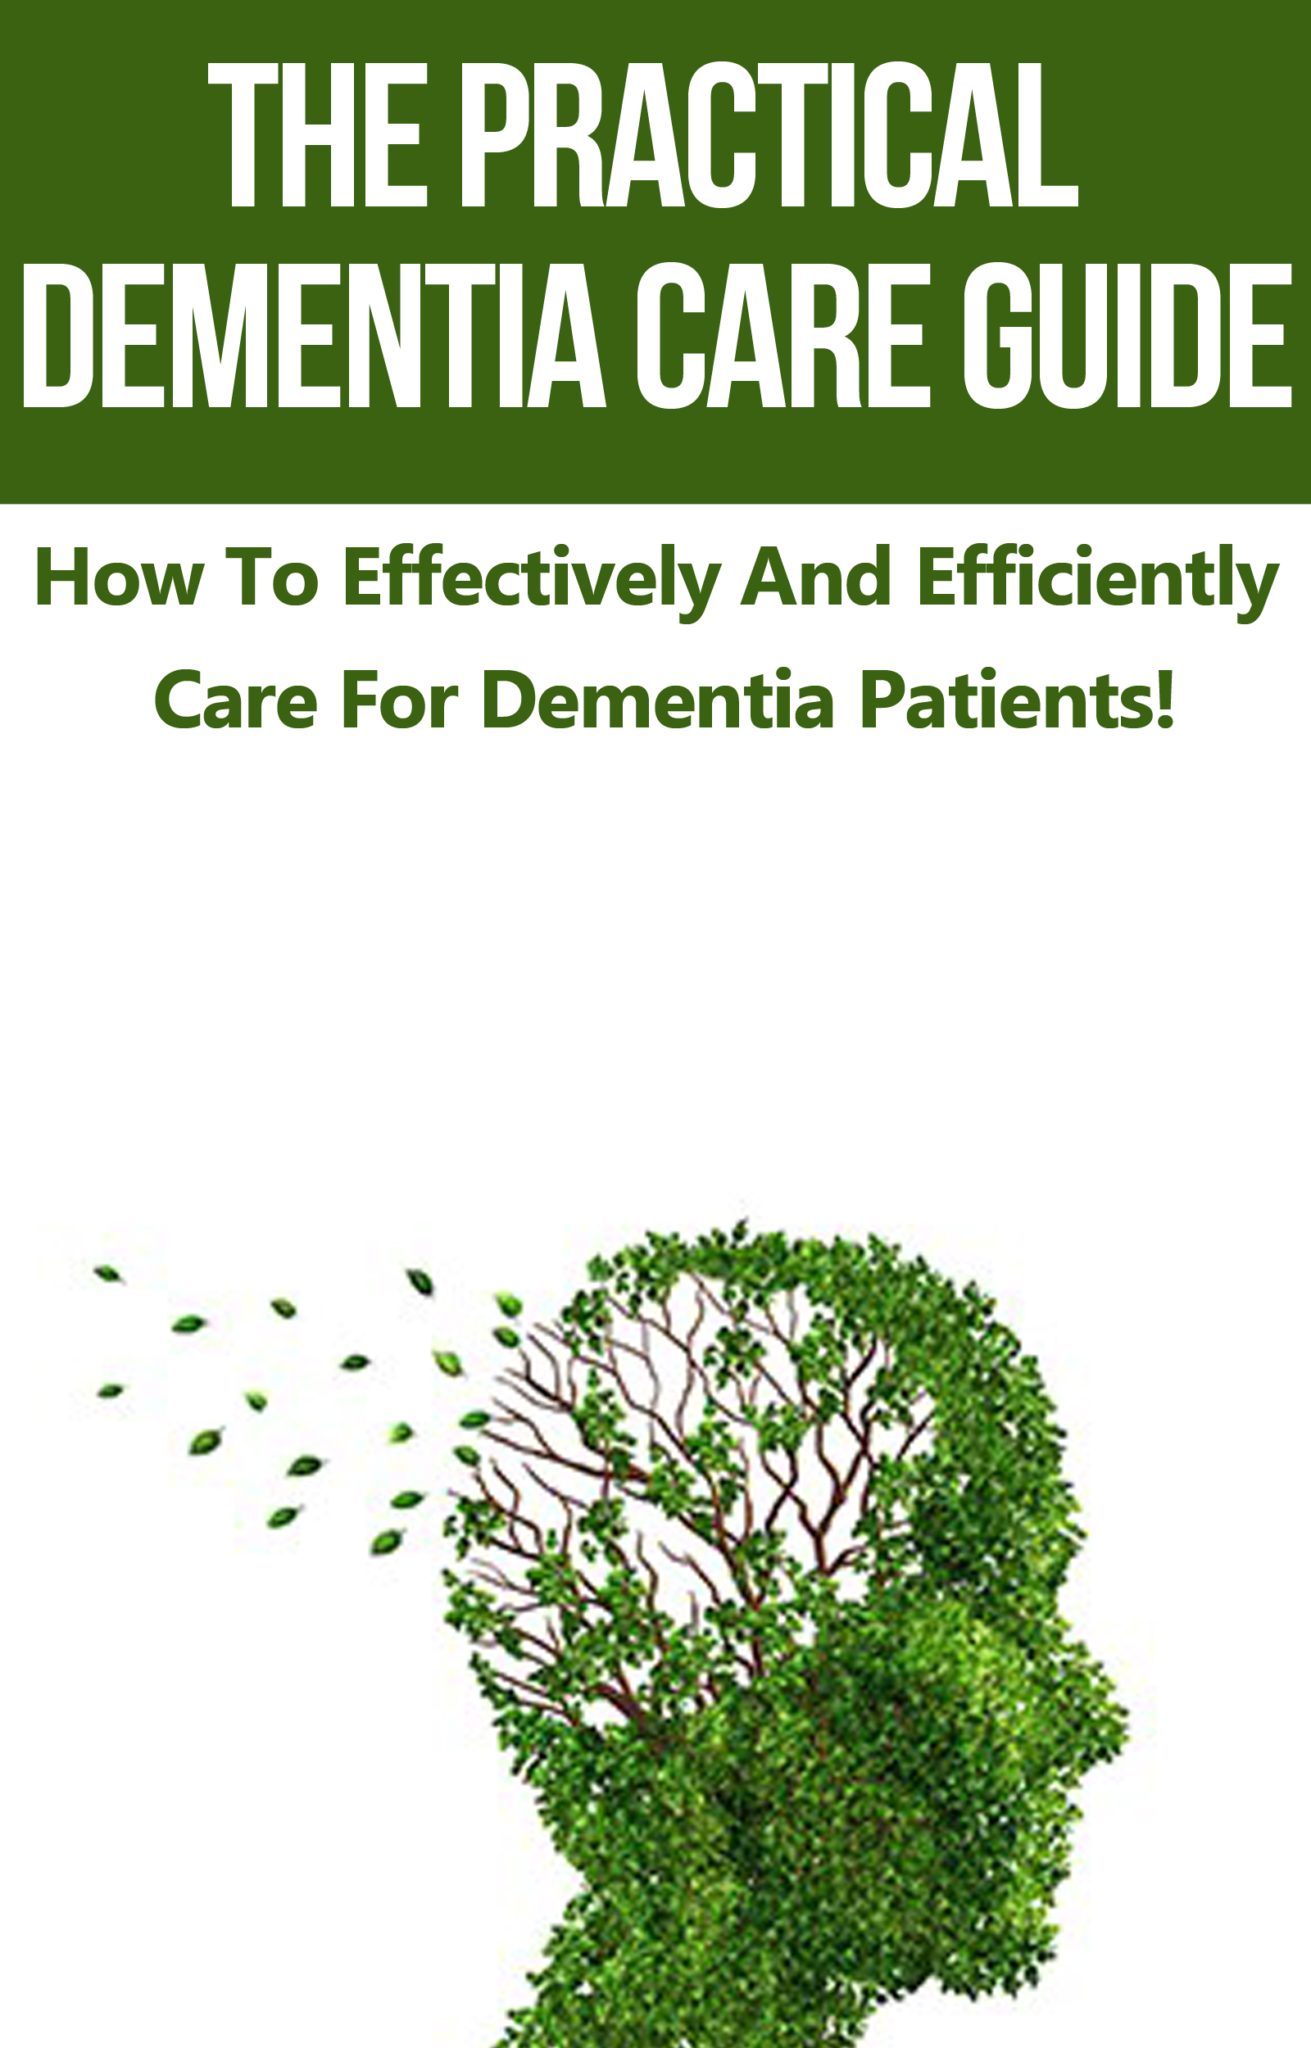 The Practical Dementia Care Guide: How To Effectively And Efficiently Care For Dementia Patients by George Bradley